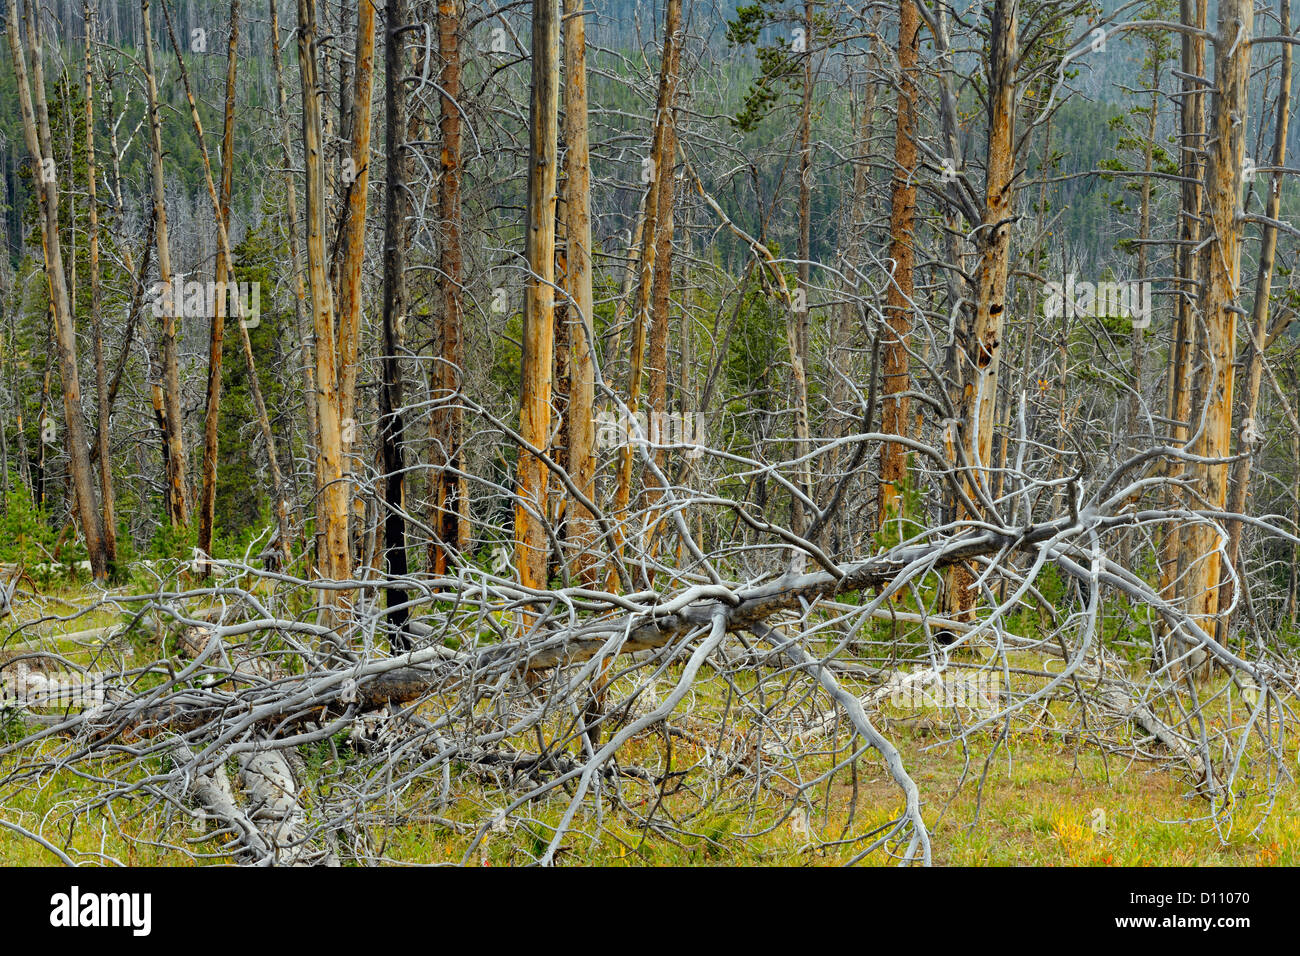 Dead tree snags killed by a forest fire and regenerating forest, Yellowstone NP, Wyoming, USA Stock Photo